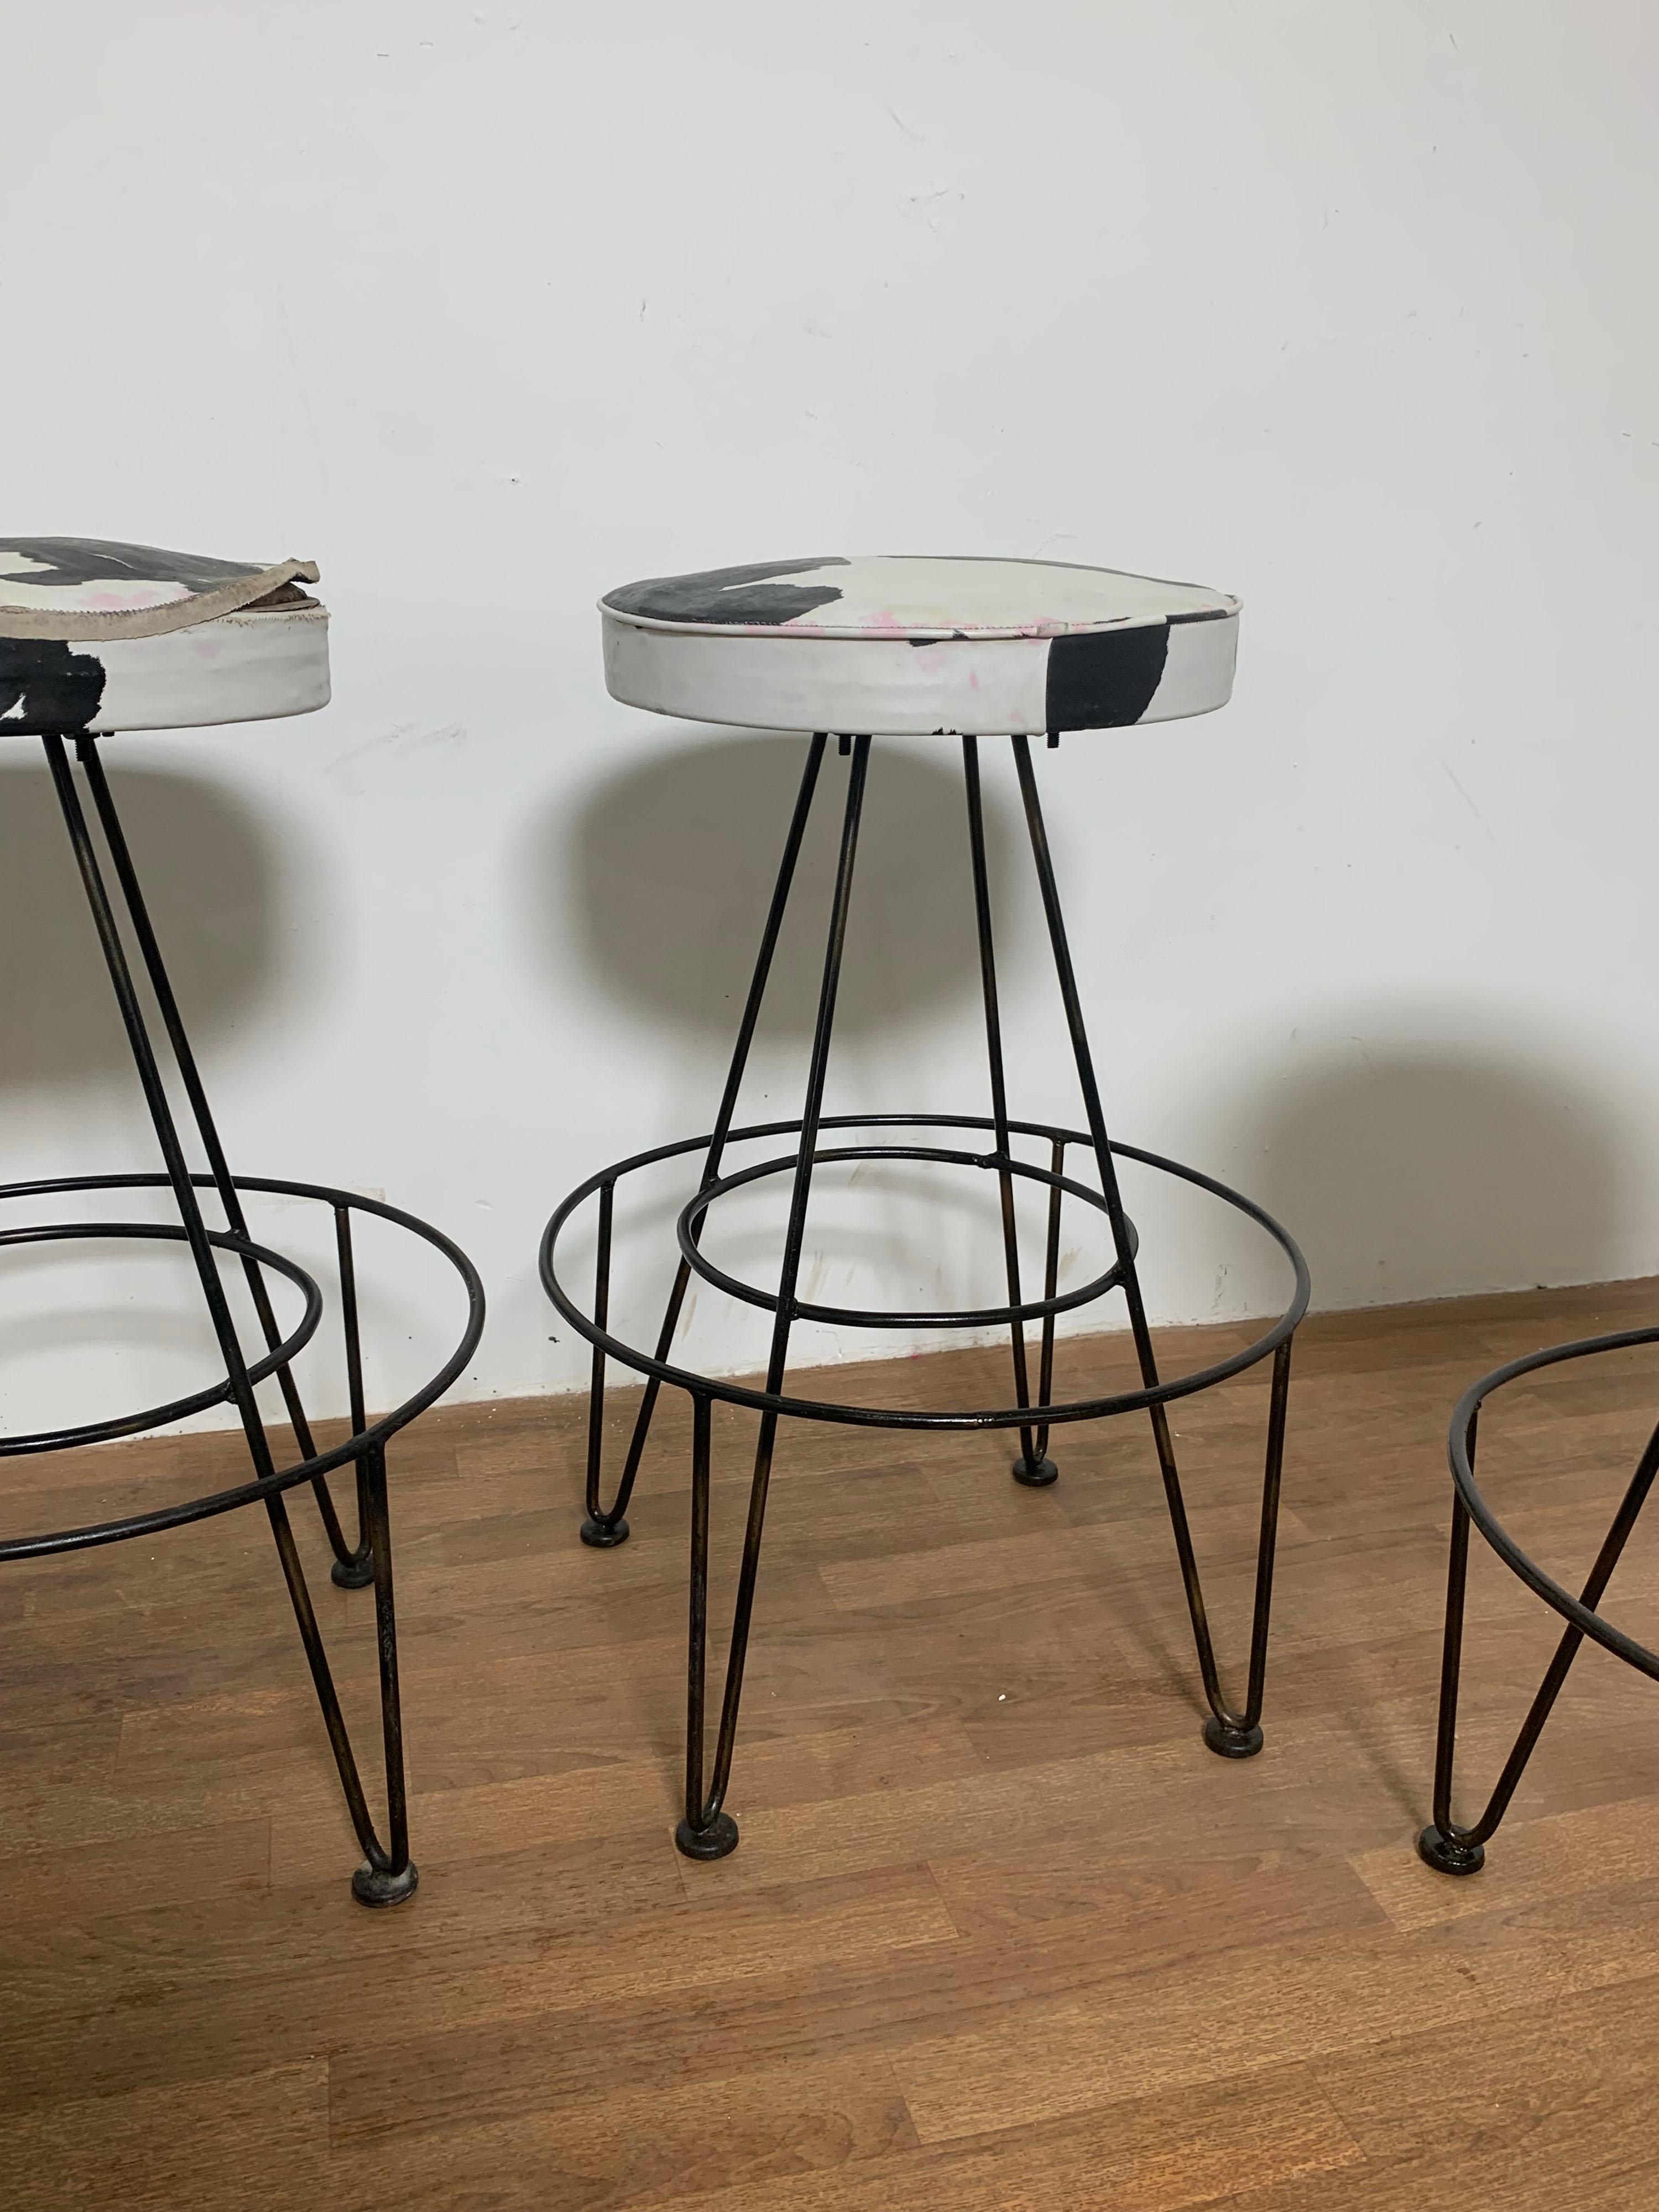 Mid-Century Modern Set of Four Swivel Bar Stools Attributed to Frederick Weinberg Circa 1950s For Sale